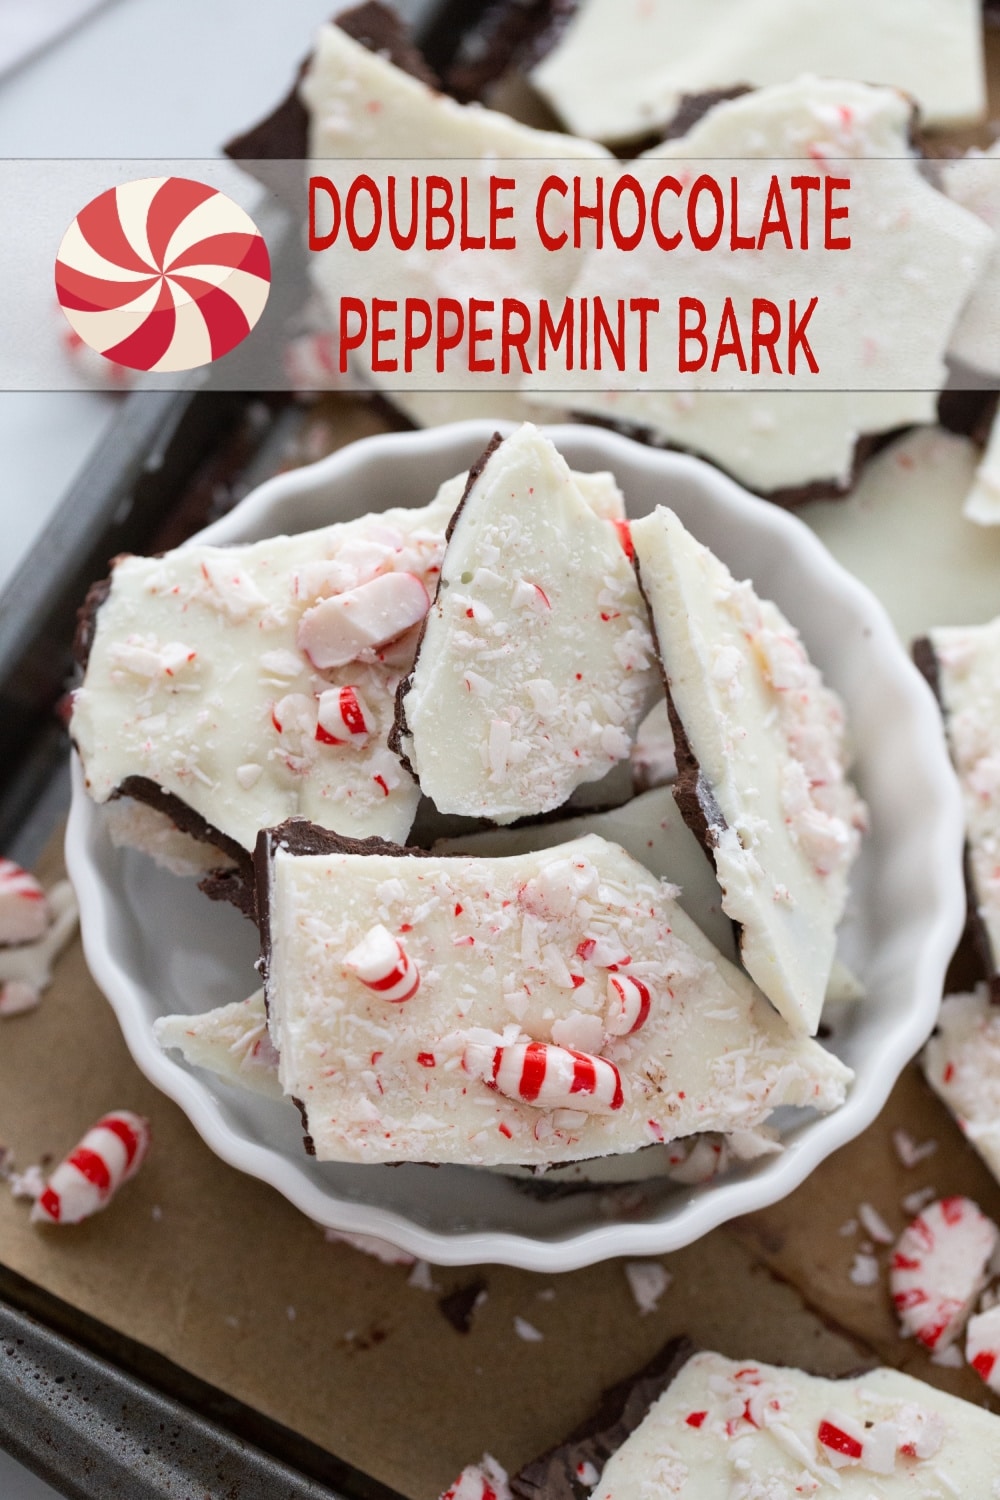 Add some holiday cheer to your dessert spread with this delicious double chocolate peppermint bark recipe! Made with a blend of dark and white chocolate chips, this easy-to-make treat is sure to be a hit with chocolate lovers of all ages. Perfect for gifting or enjoying with a mug of hot cocoa by the fire, this chocolate peppermint bark is a must-have for any holiday celebration. via @cmpollak1